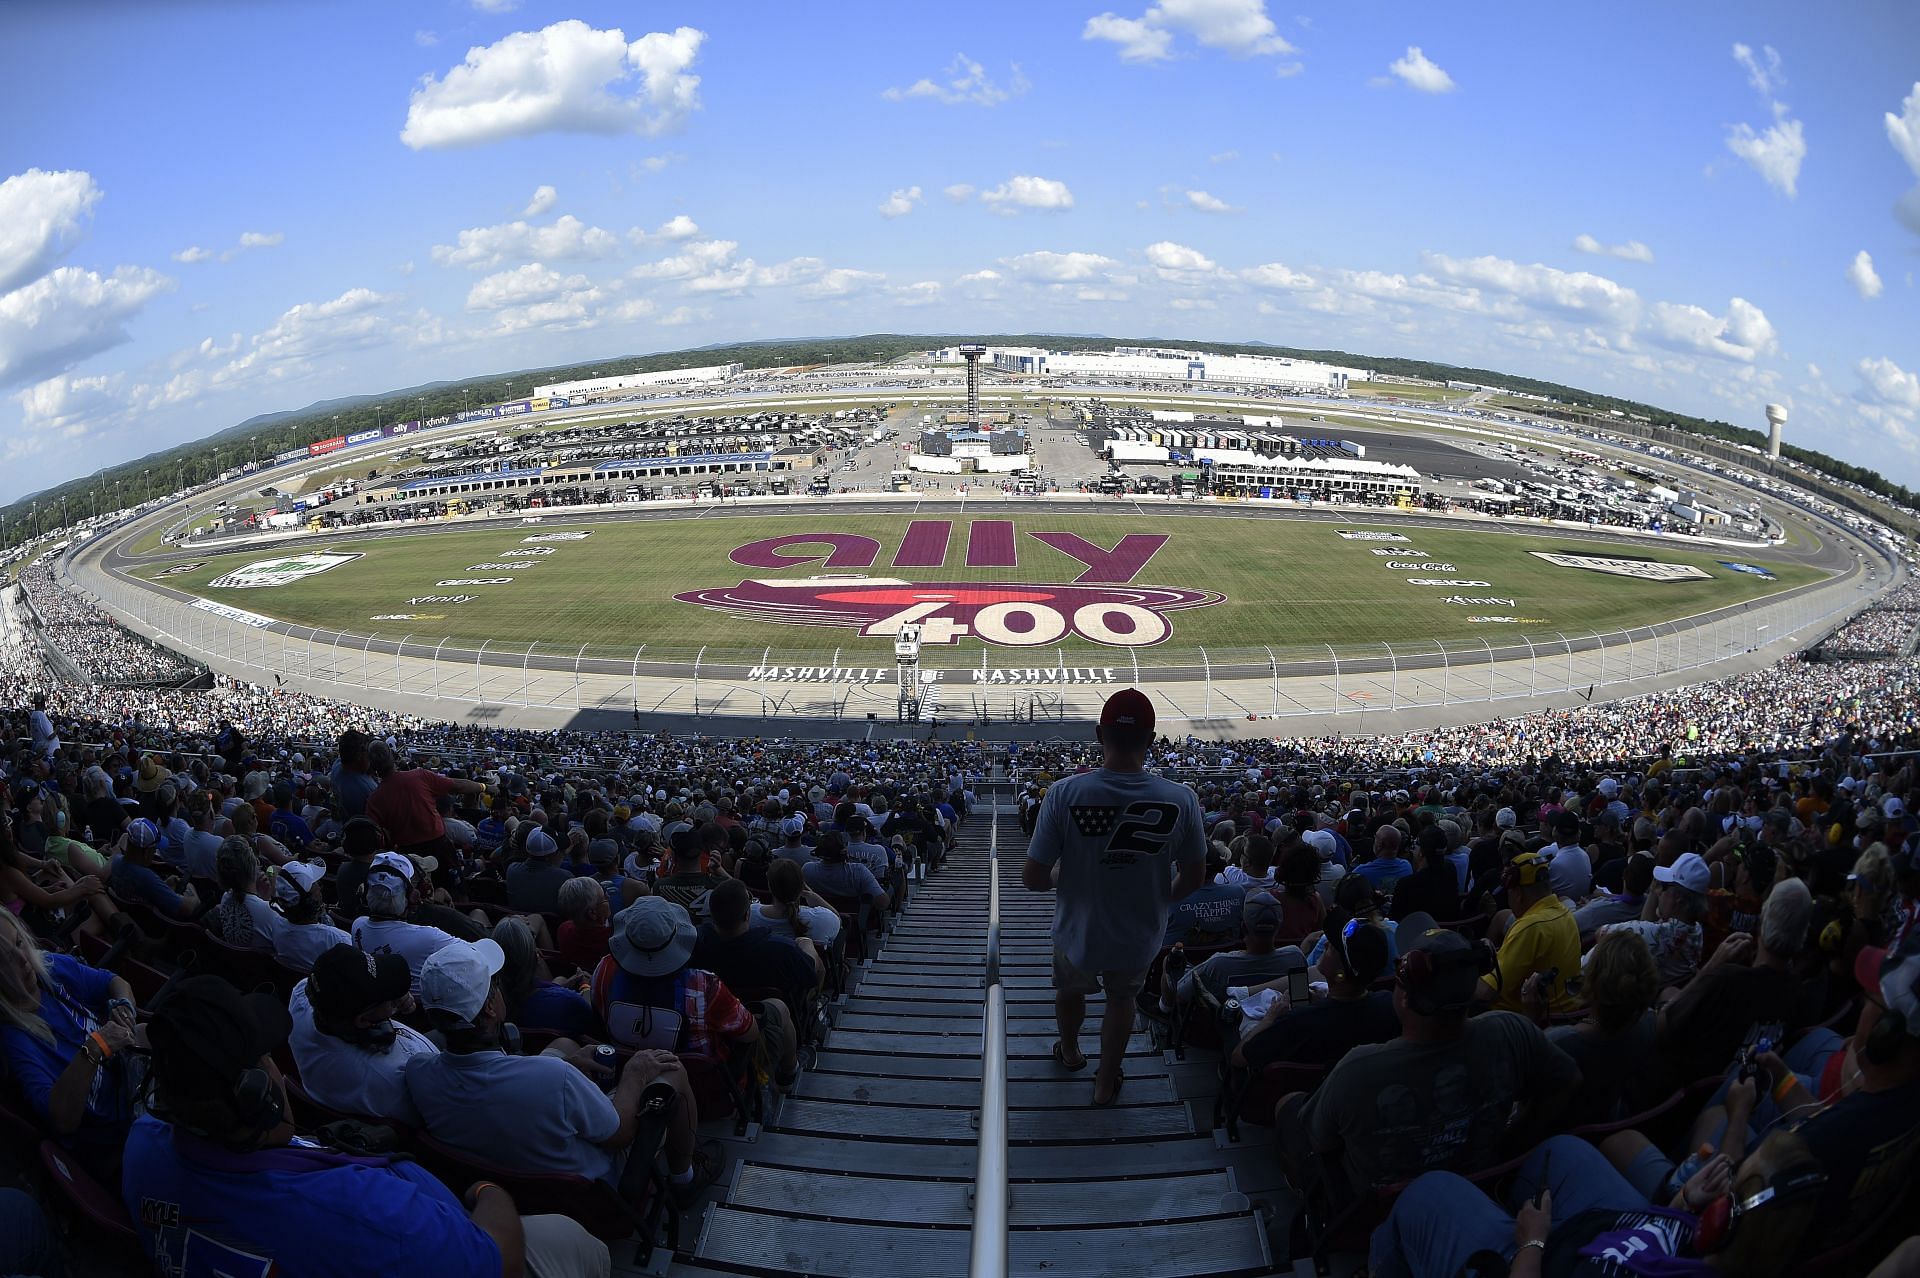 NASCAR 2022 Where to watch Ally 400 at Nashville Superspeedway race? Time, TV Schedule and Live Stream